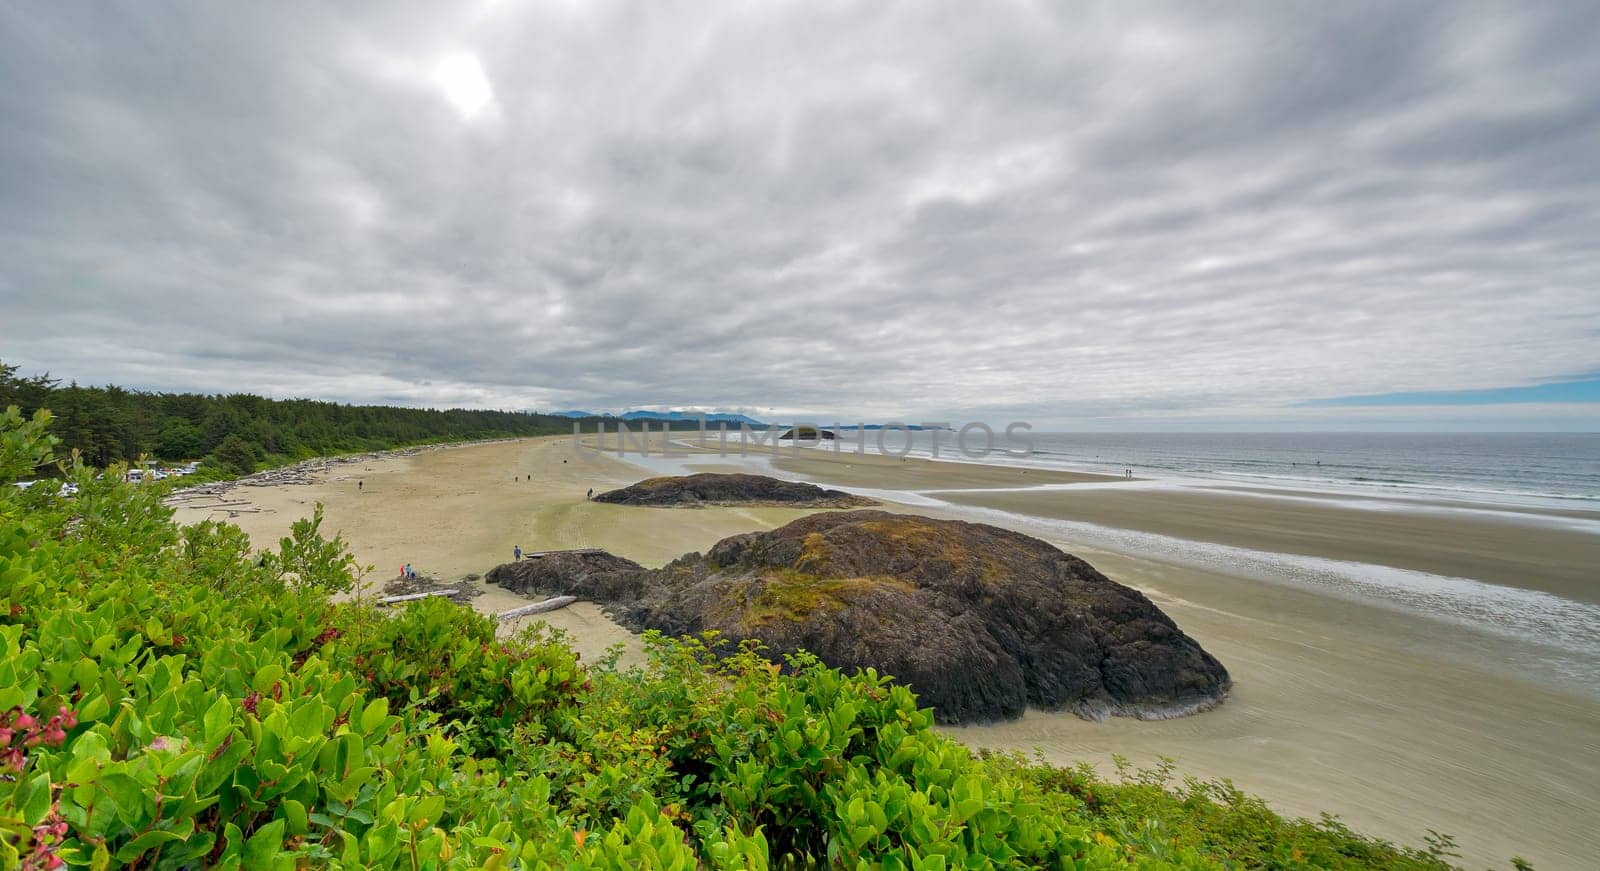 Overview of Pacific ocean long beach near Tofino, British Columbia, Canada by Imagenet